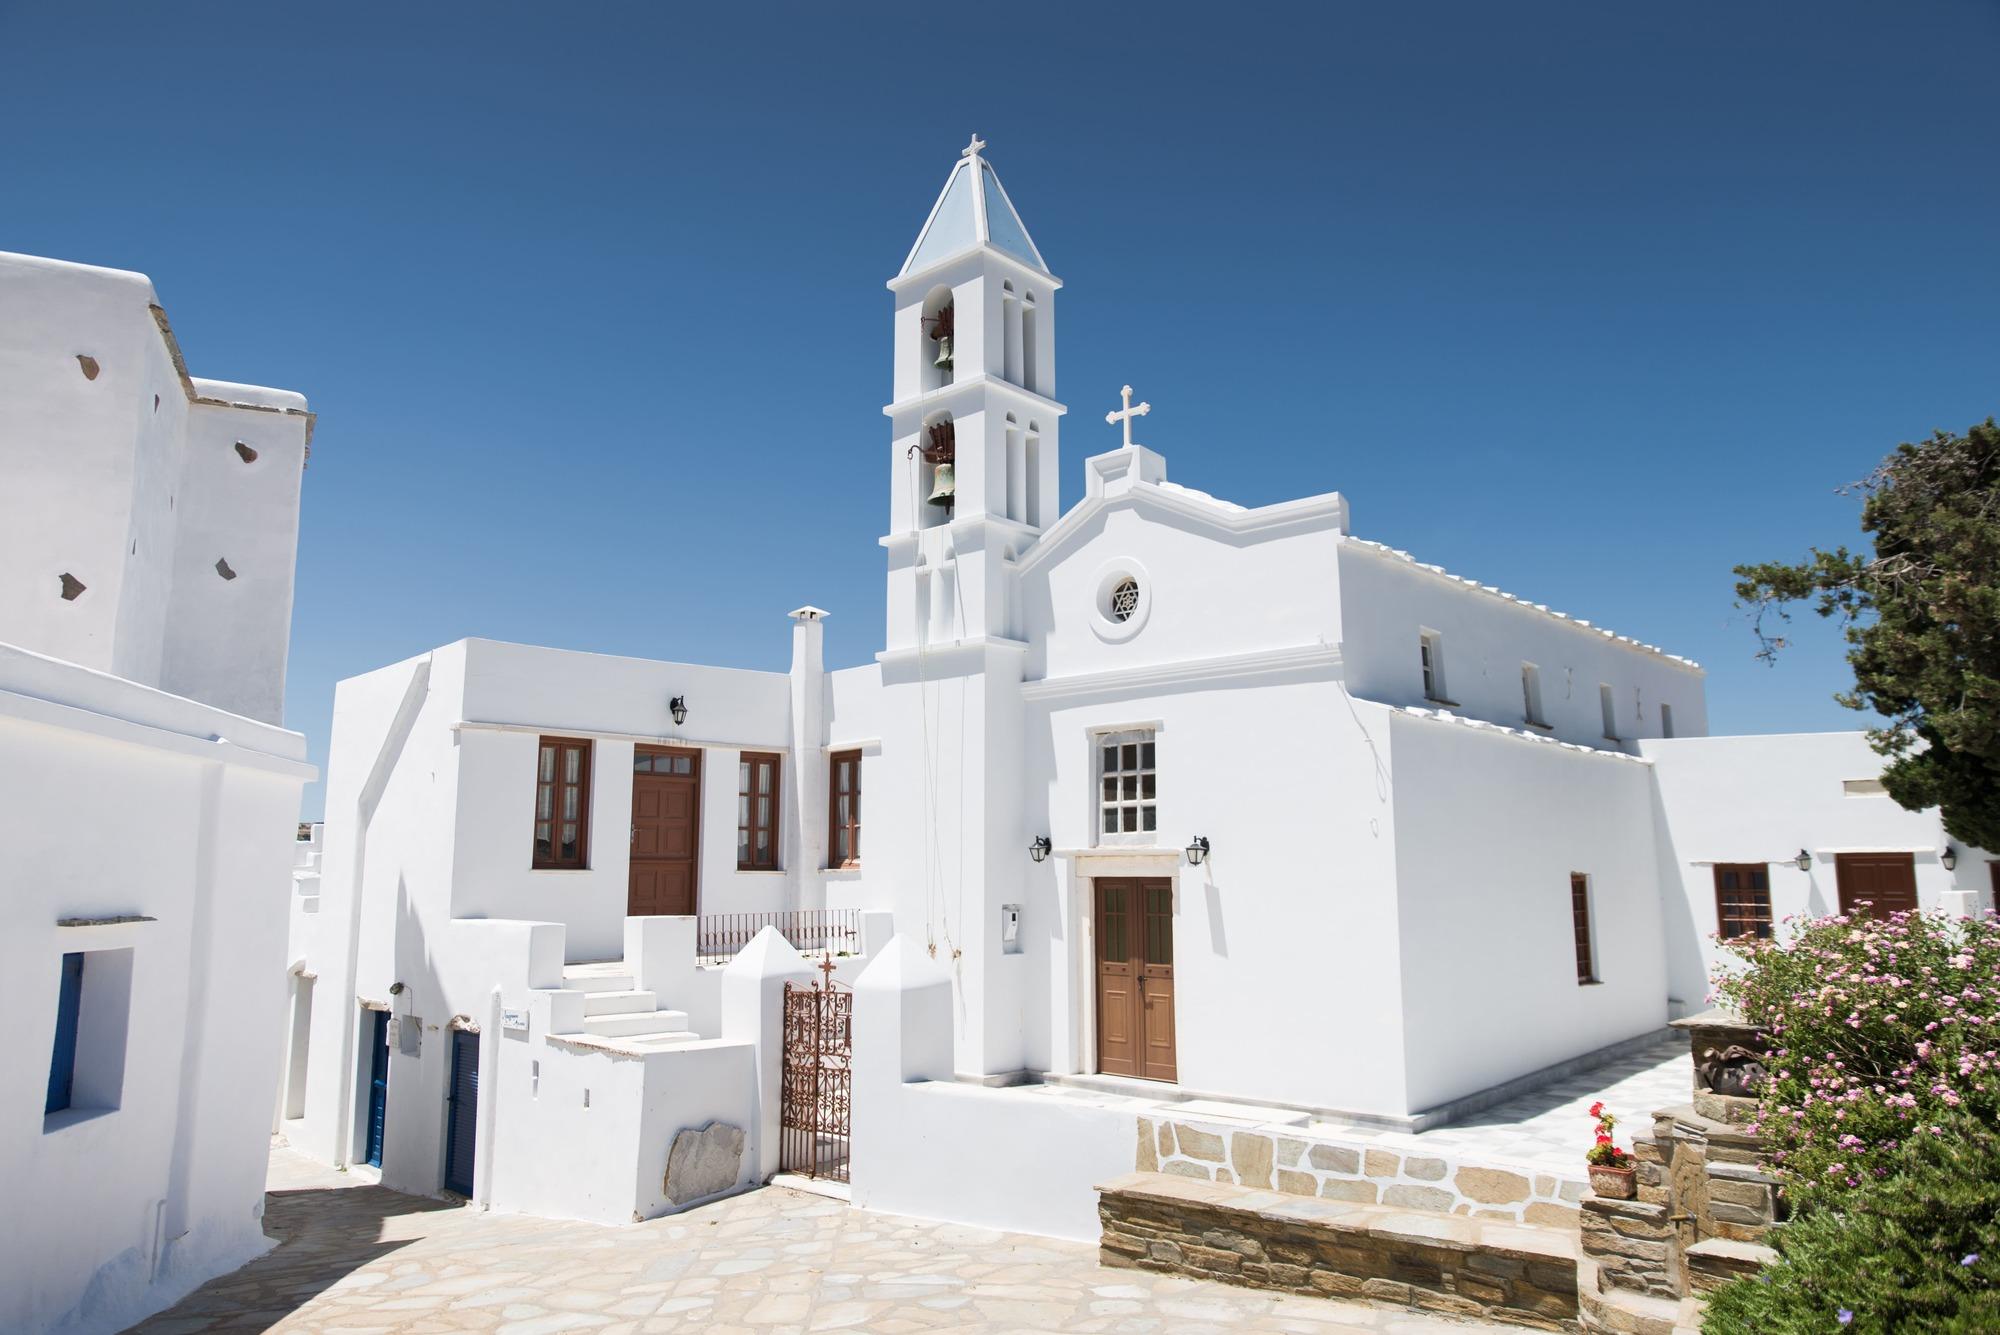 Cyclades Greece: white church with blue sky behind in tinos greece